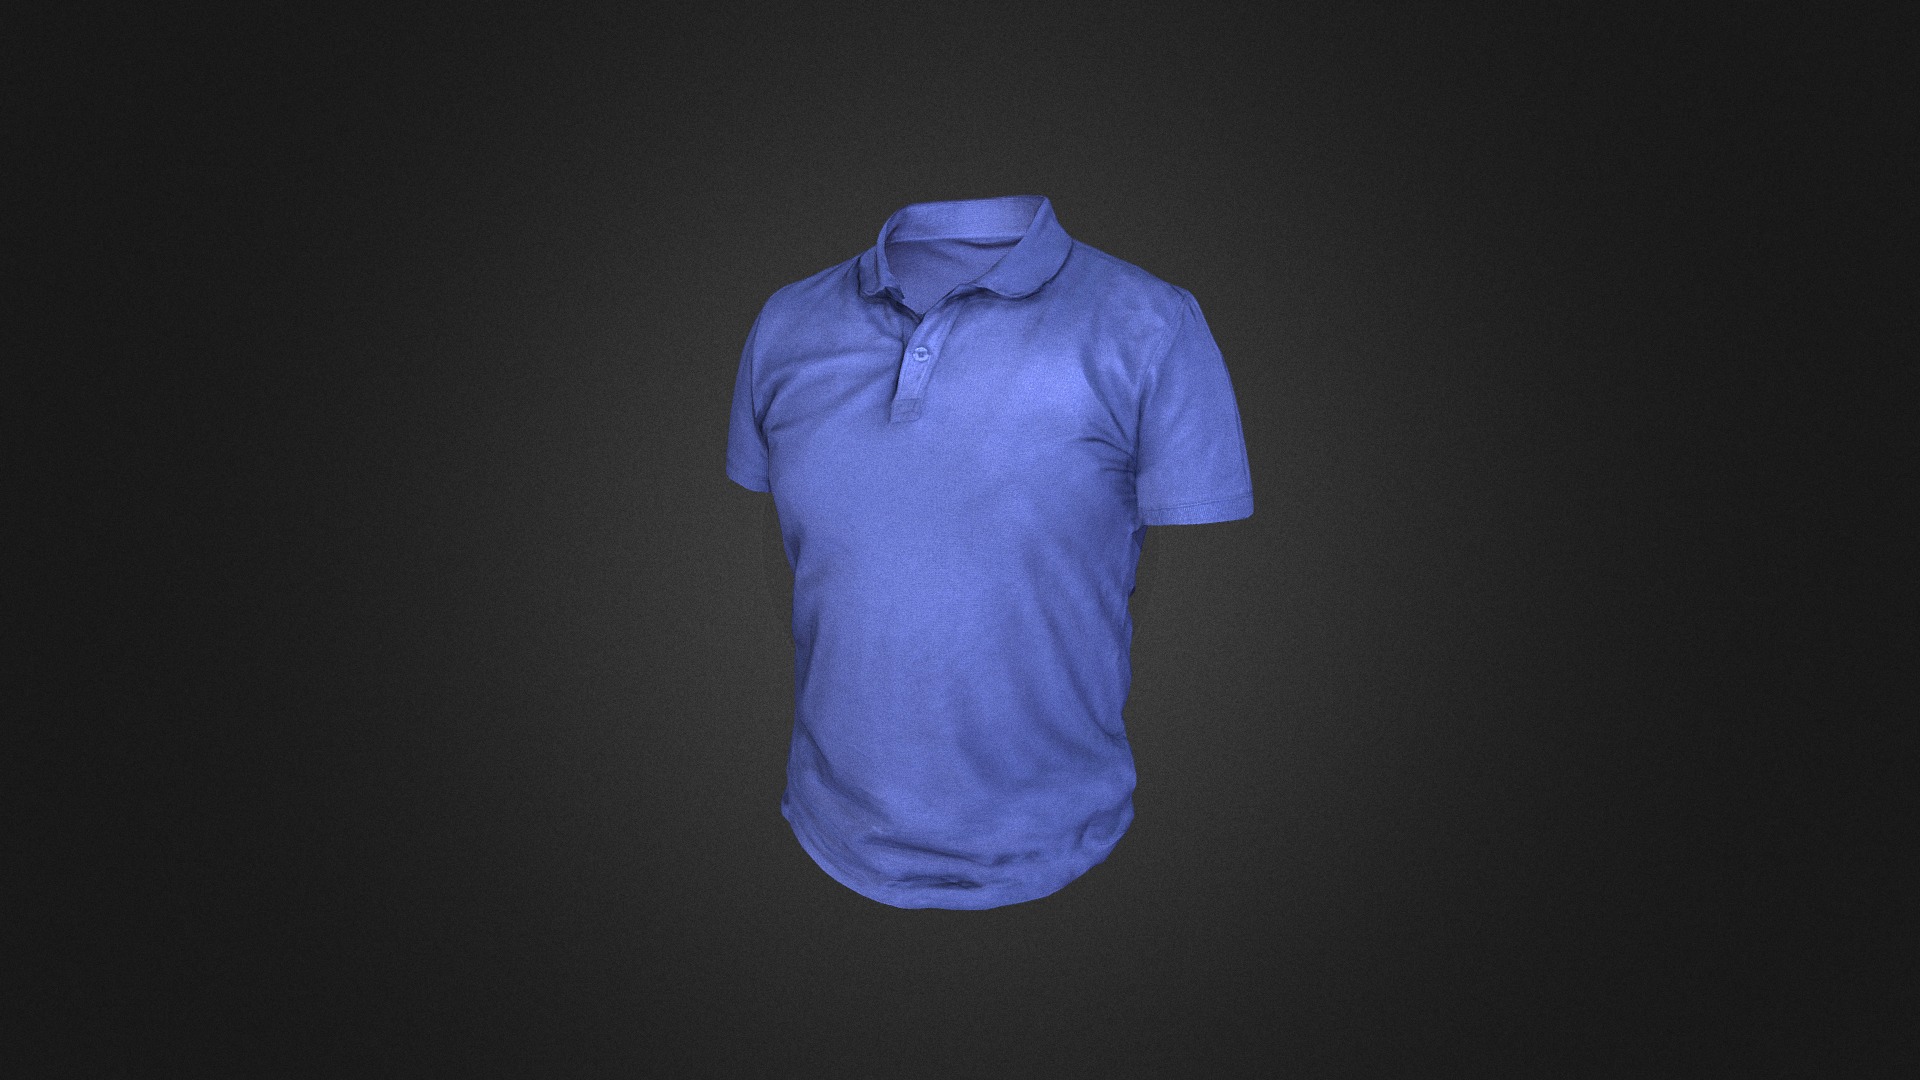 3D model T-shirt - This is a 3D model of the T-shirt. The 3D model is about a blue shirt on a black background.